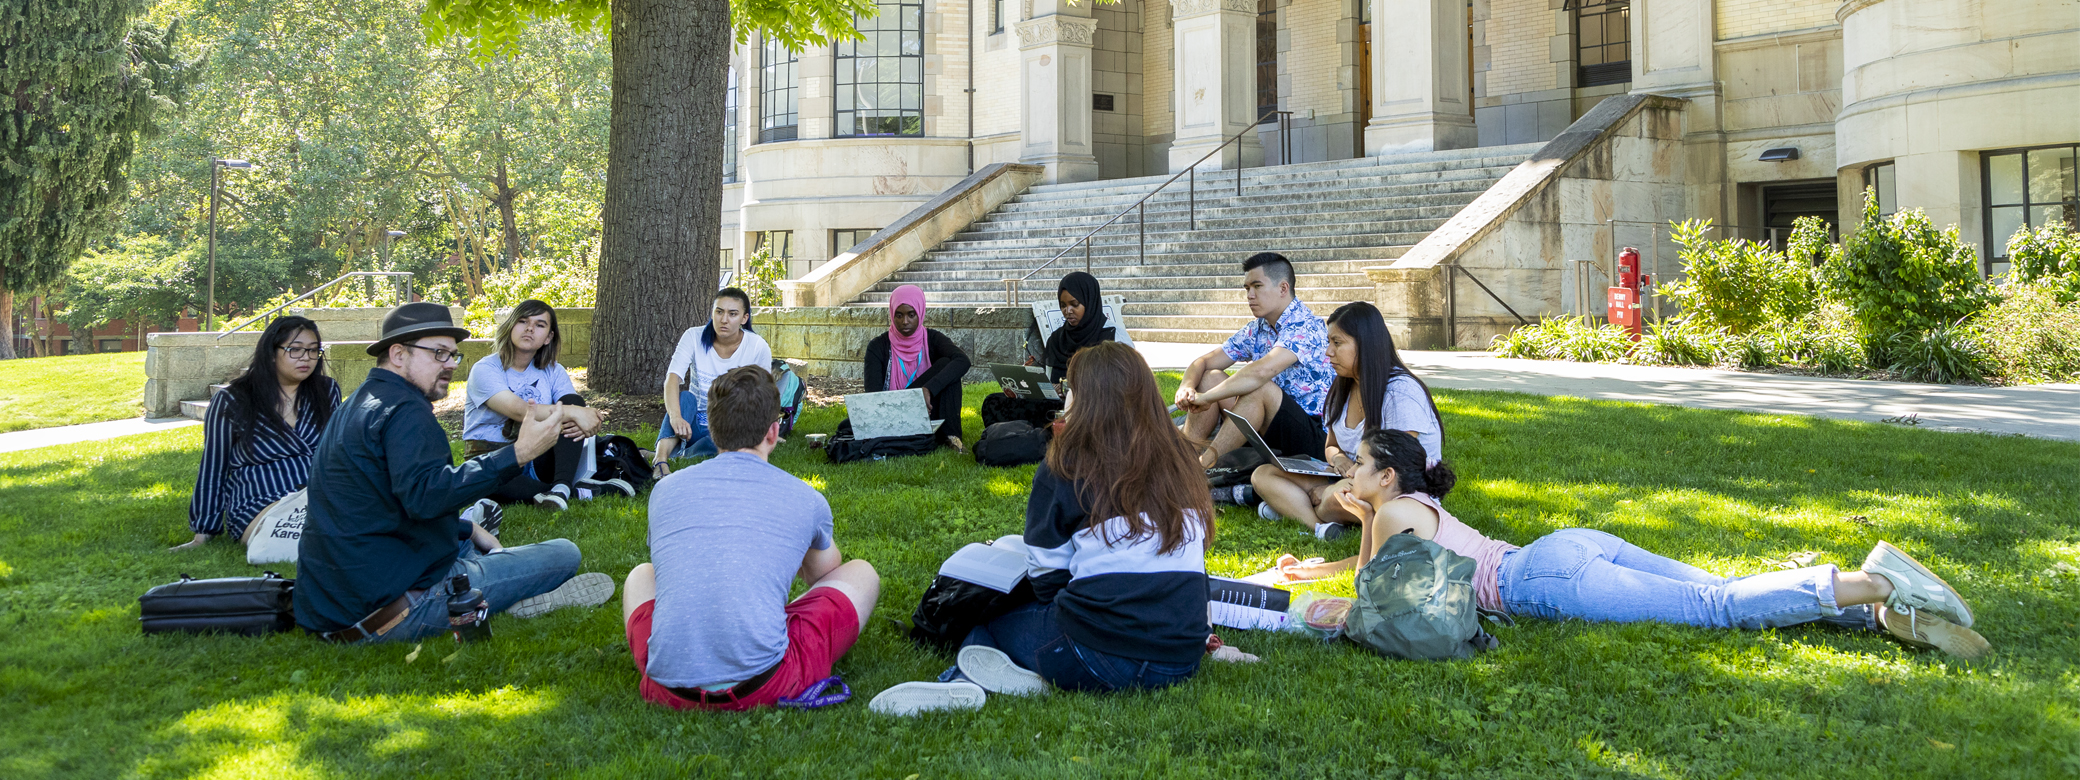 A group of students conversing on in front of Parrington Hall.